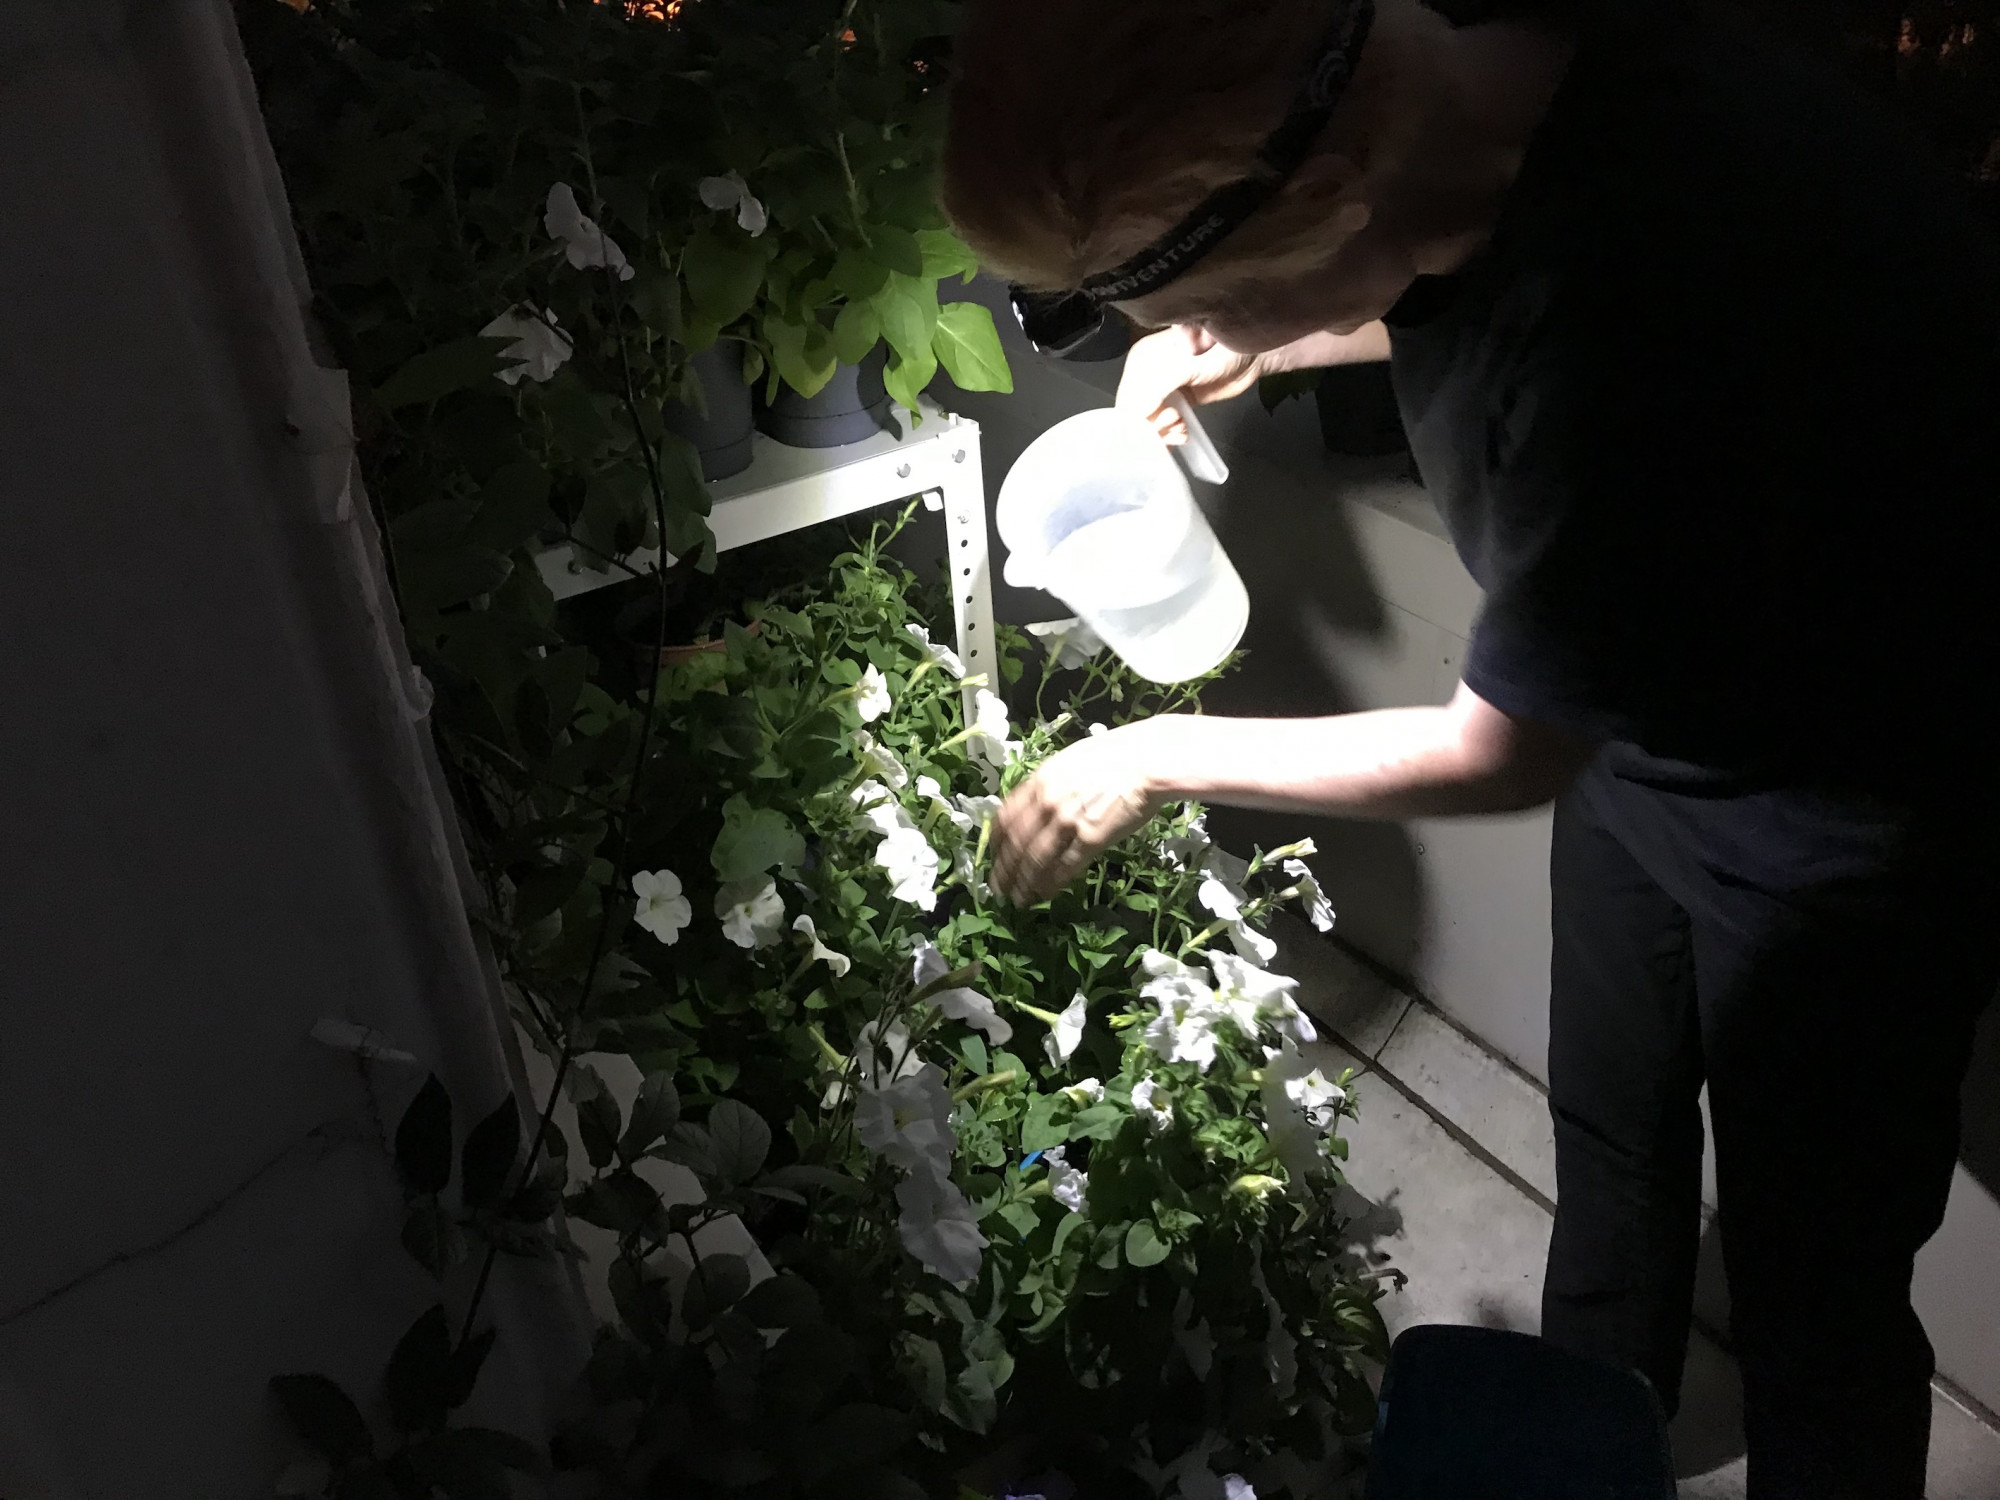 Petunias Are a Girl's Best Friend, 2020. Data gathered from the plants was converted into video and audio materials featured in the installation